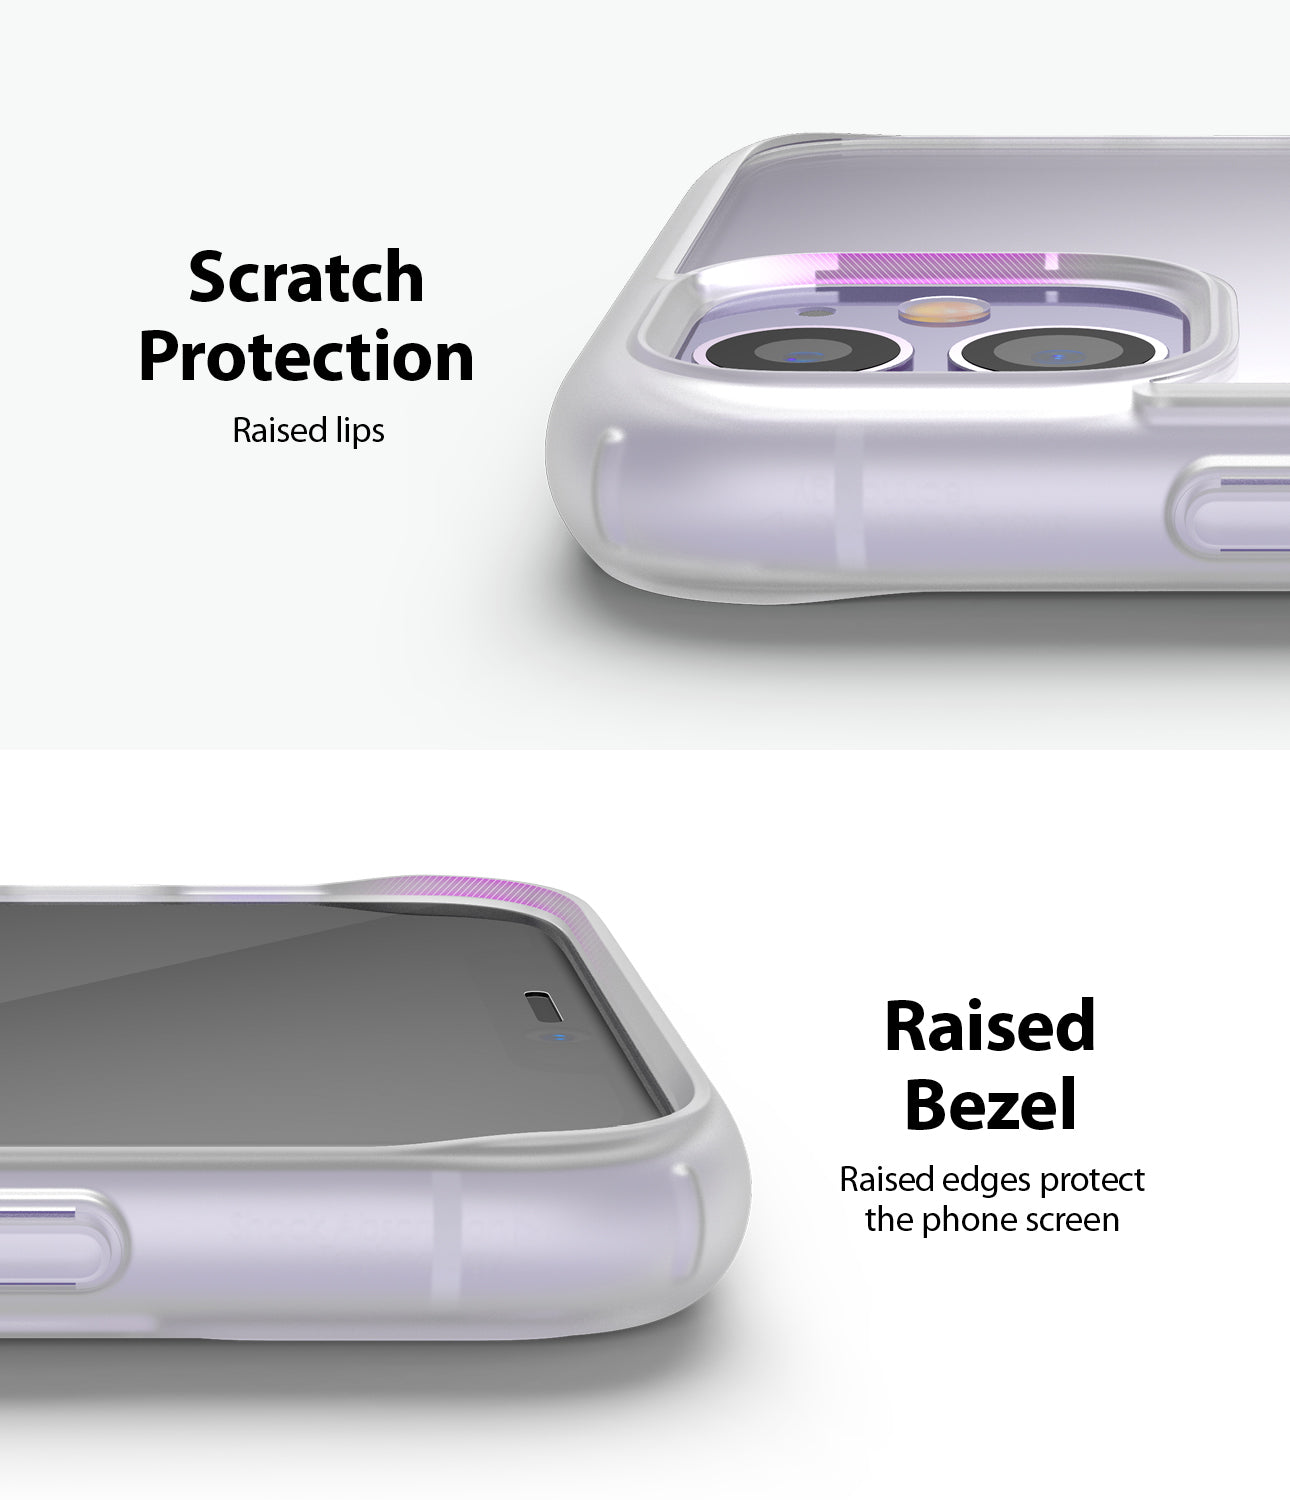 Ringke Fusion Matte for iPhone 11 Anti-Fingerprint Frosted PC Case Scratch Protection Raised Bezel